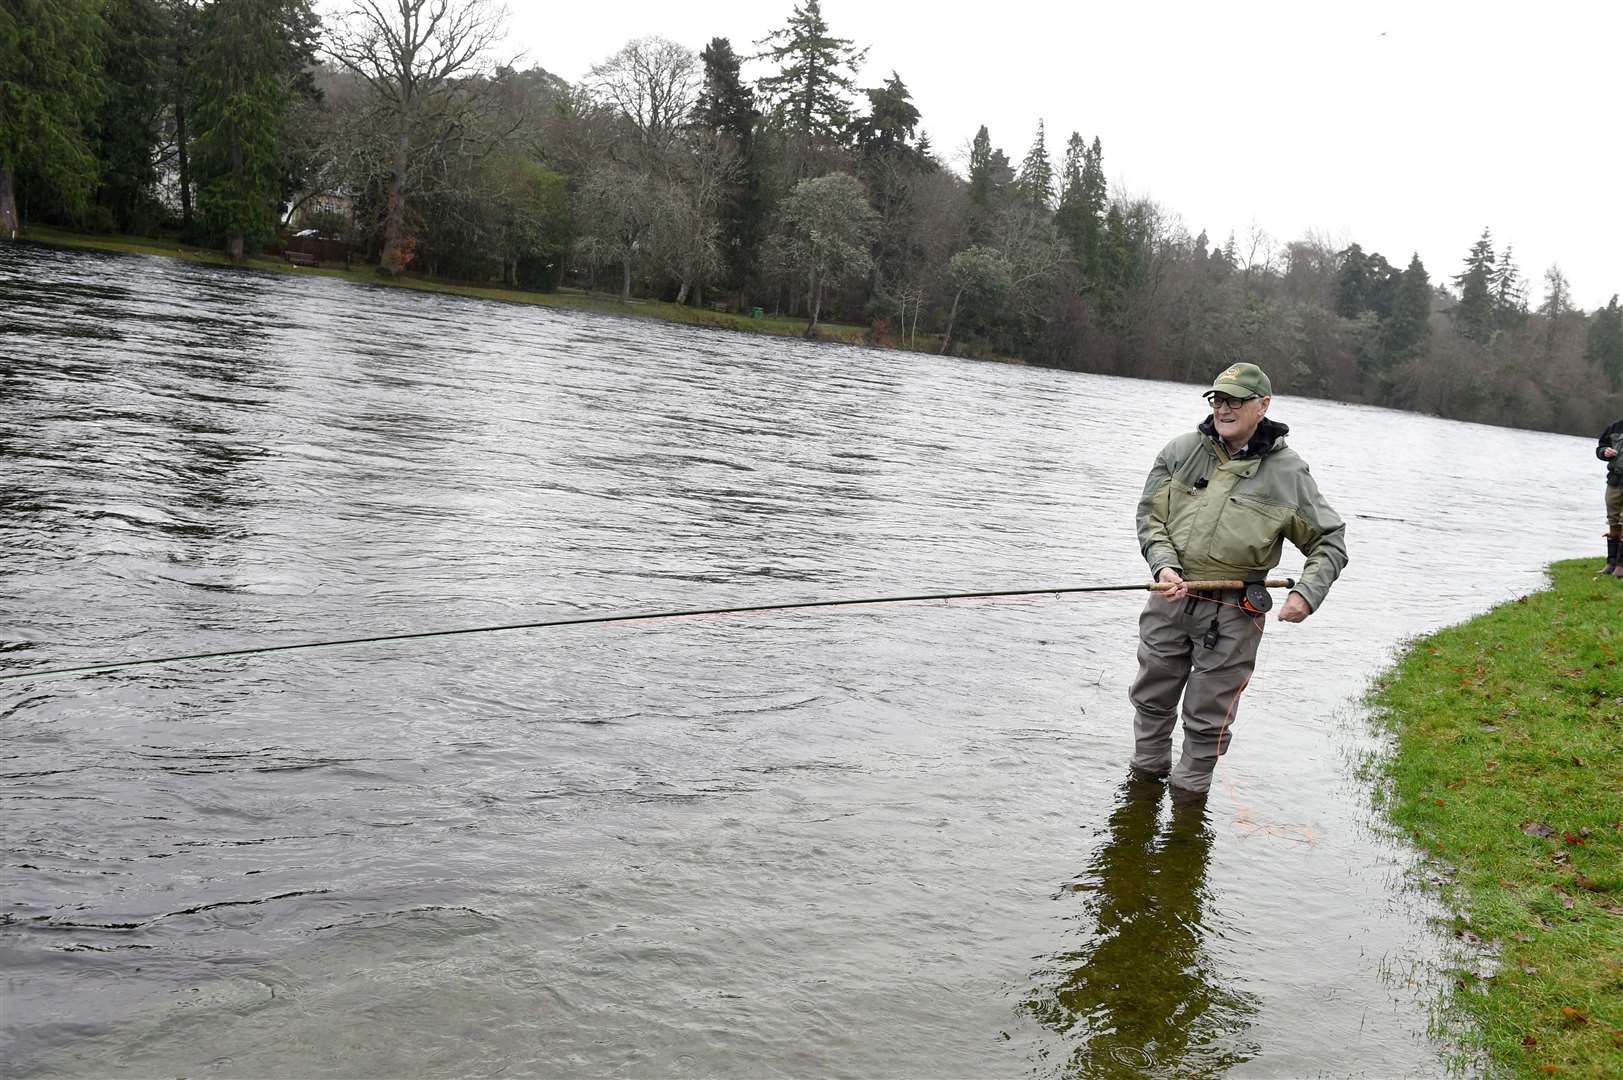 Angler Melvin Smith formally opens the River Ness salmon fishing season. Picture: Callum Mackay/HNM